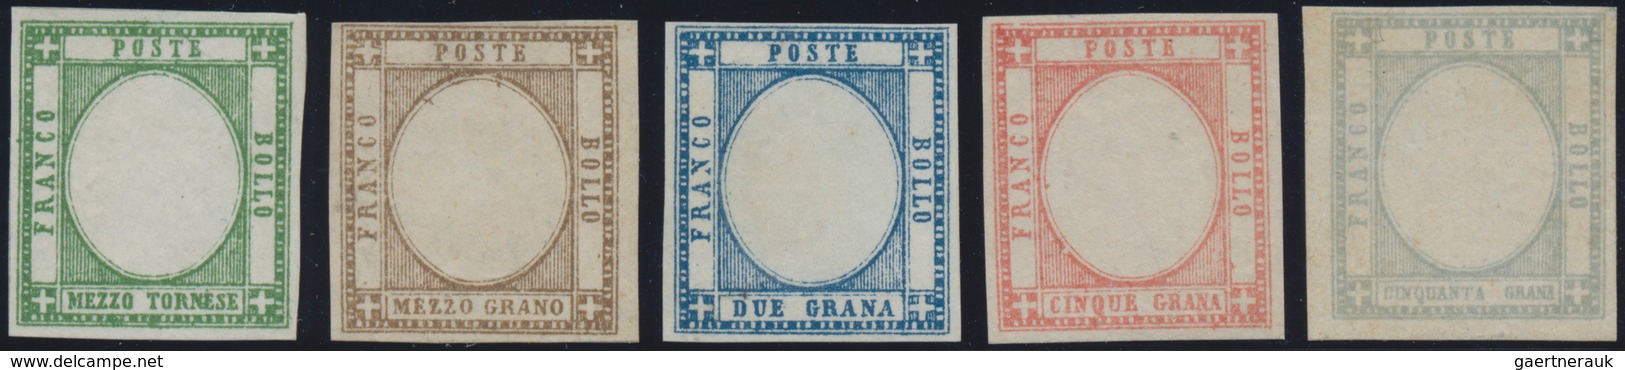 Altitalien: 1851-1862, Huge stock of mint and used stamps including Papal State 1 Scudo mint hinged